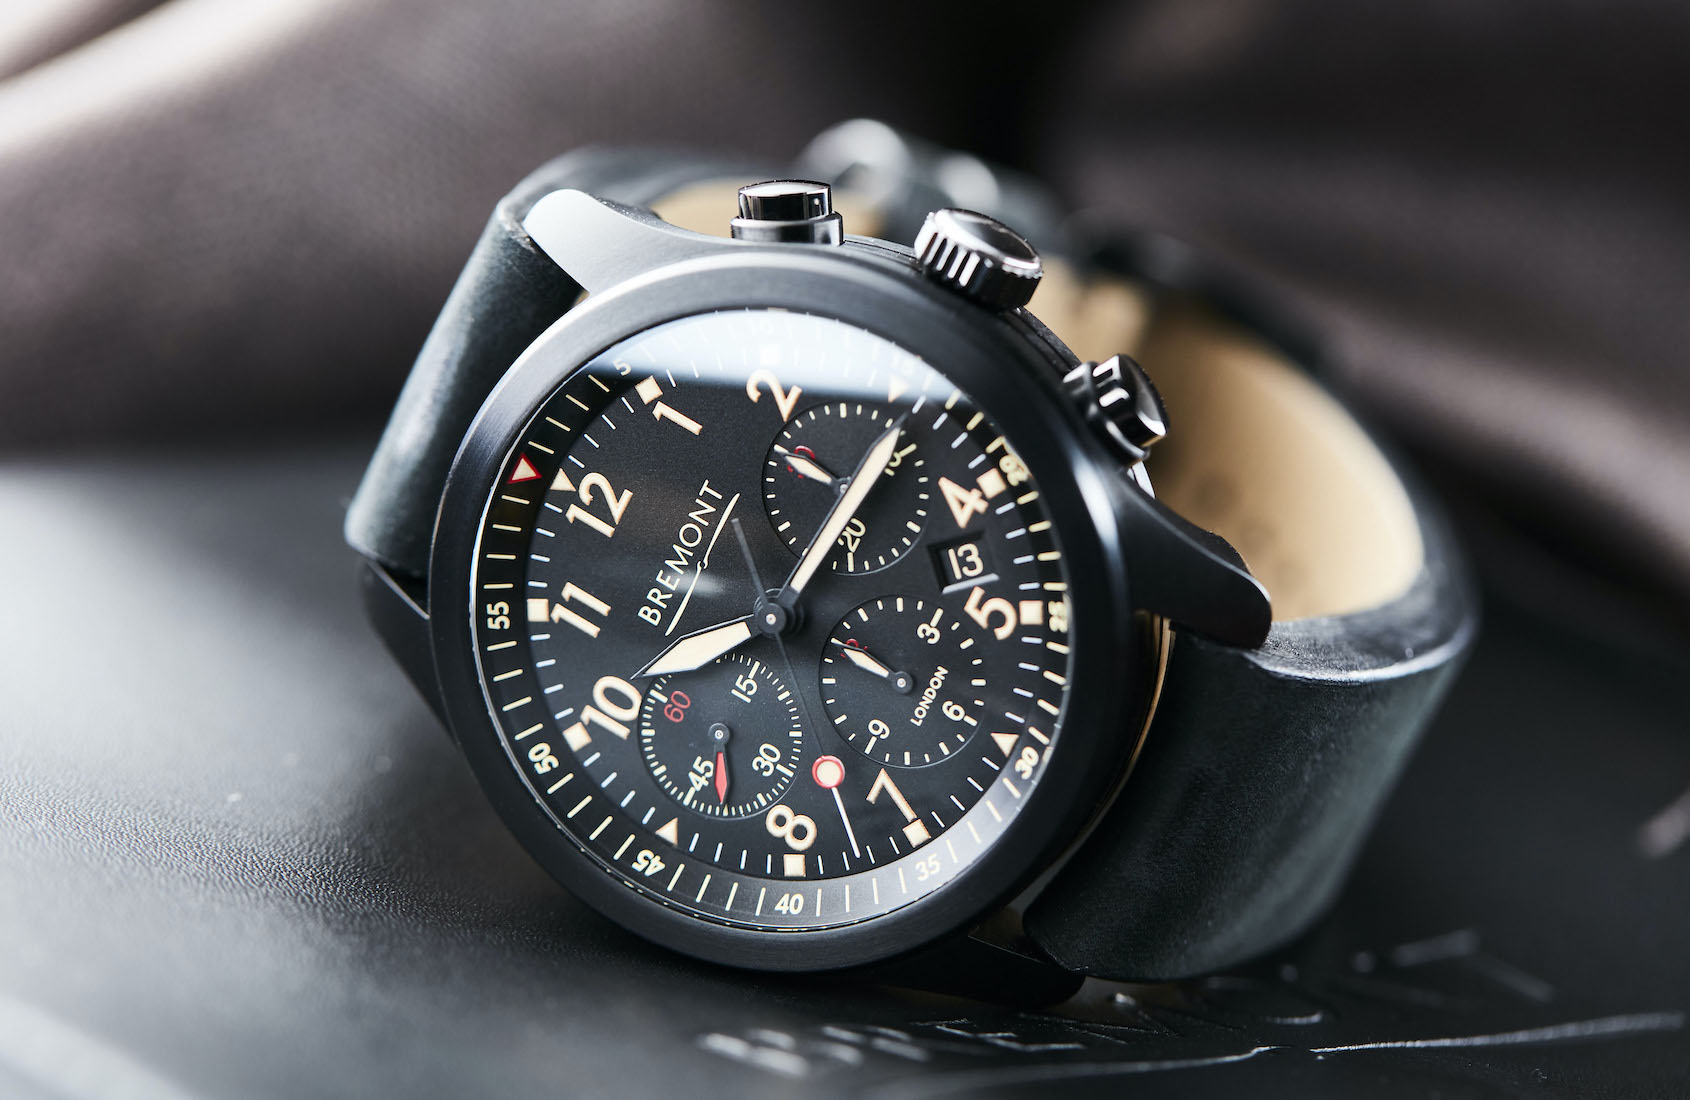 HANDS-ON: The Bremont ALT1-P2 JET might just be the blacked out chrono ...